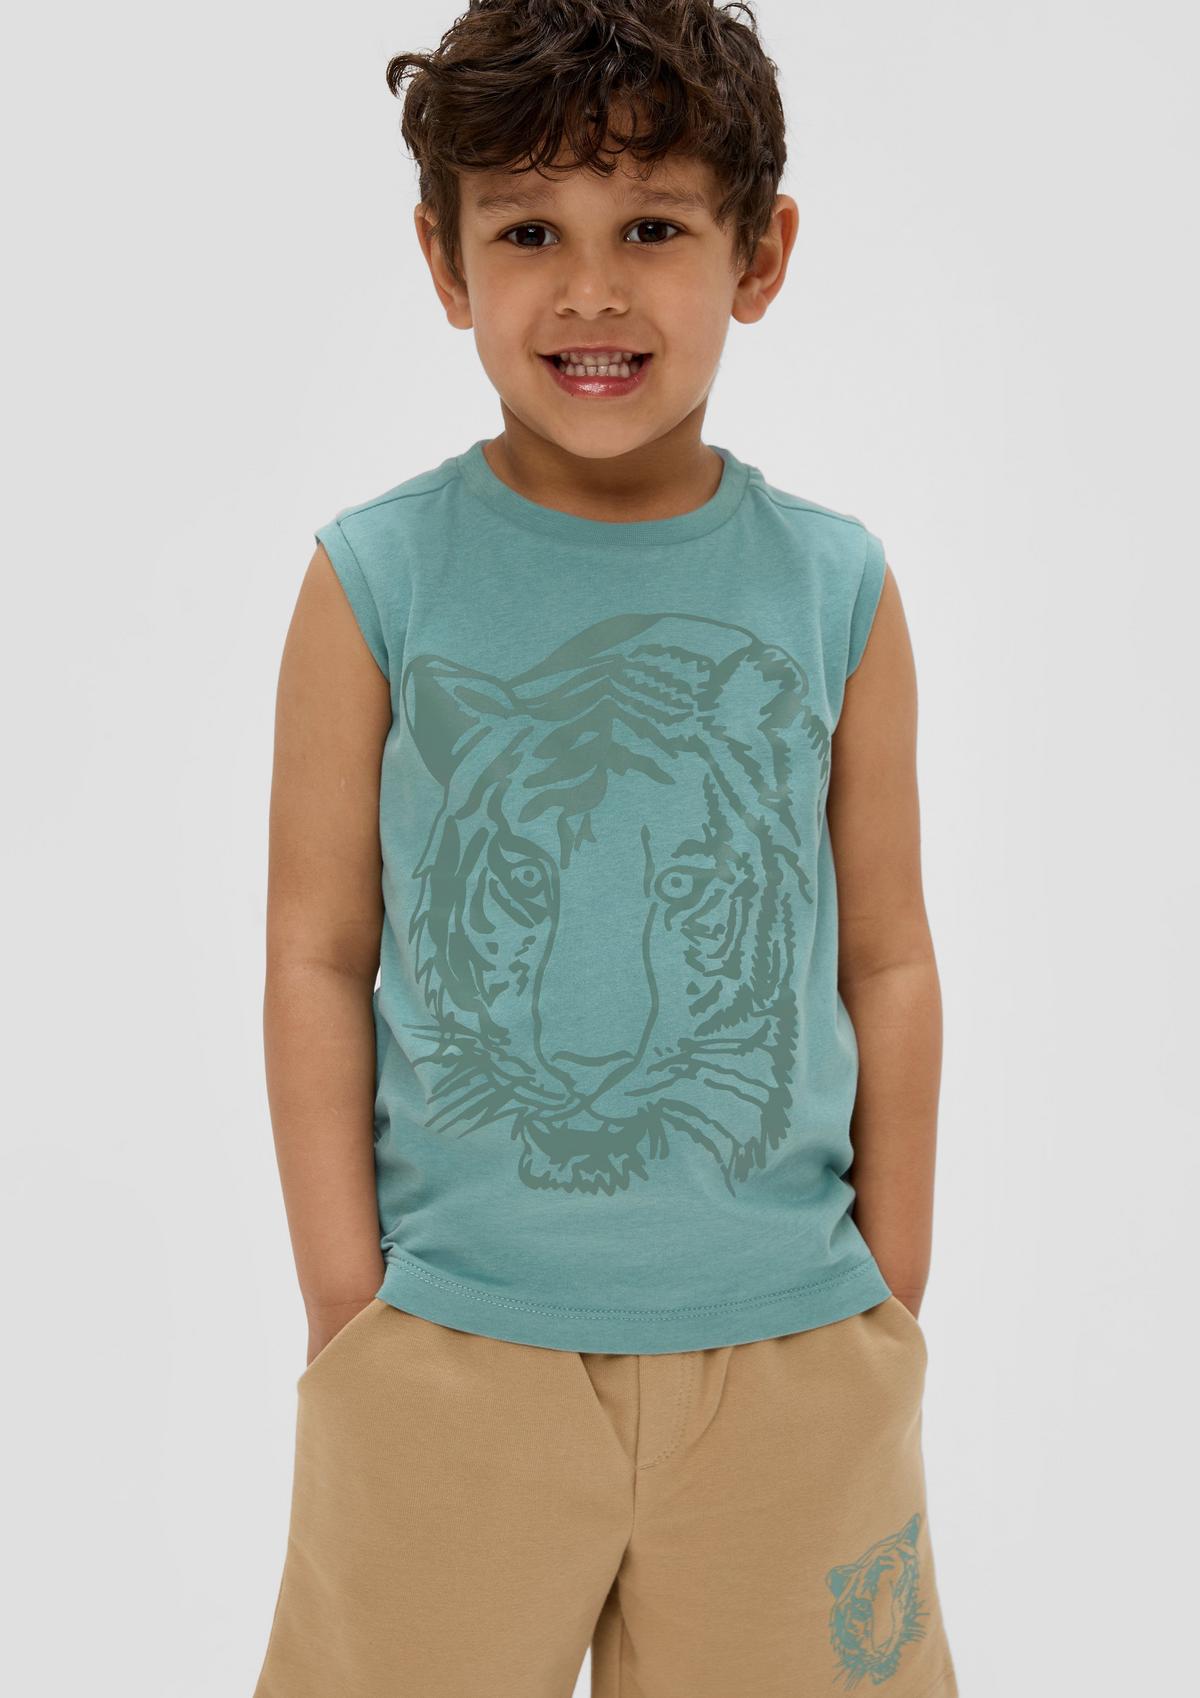 Sleeveless T-shirt with front print